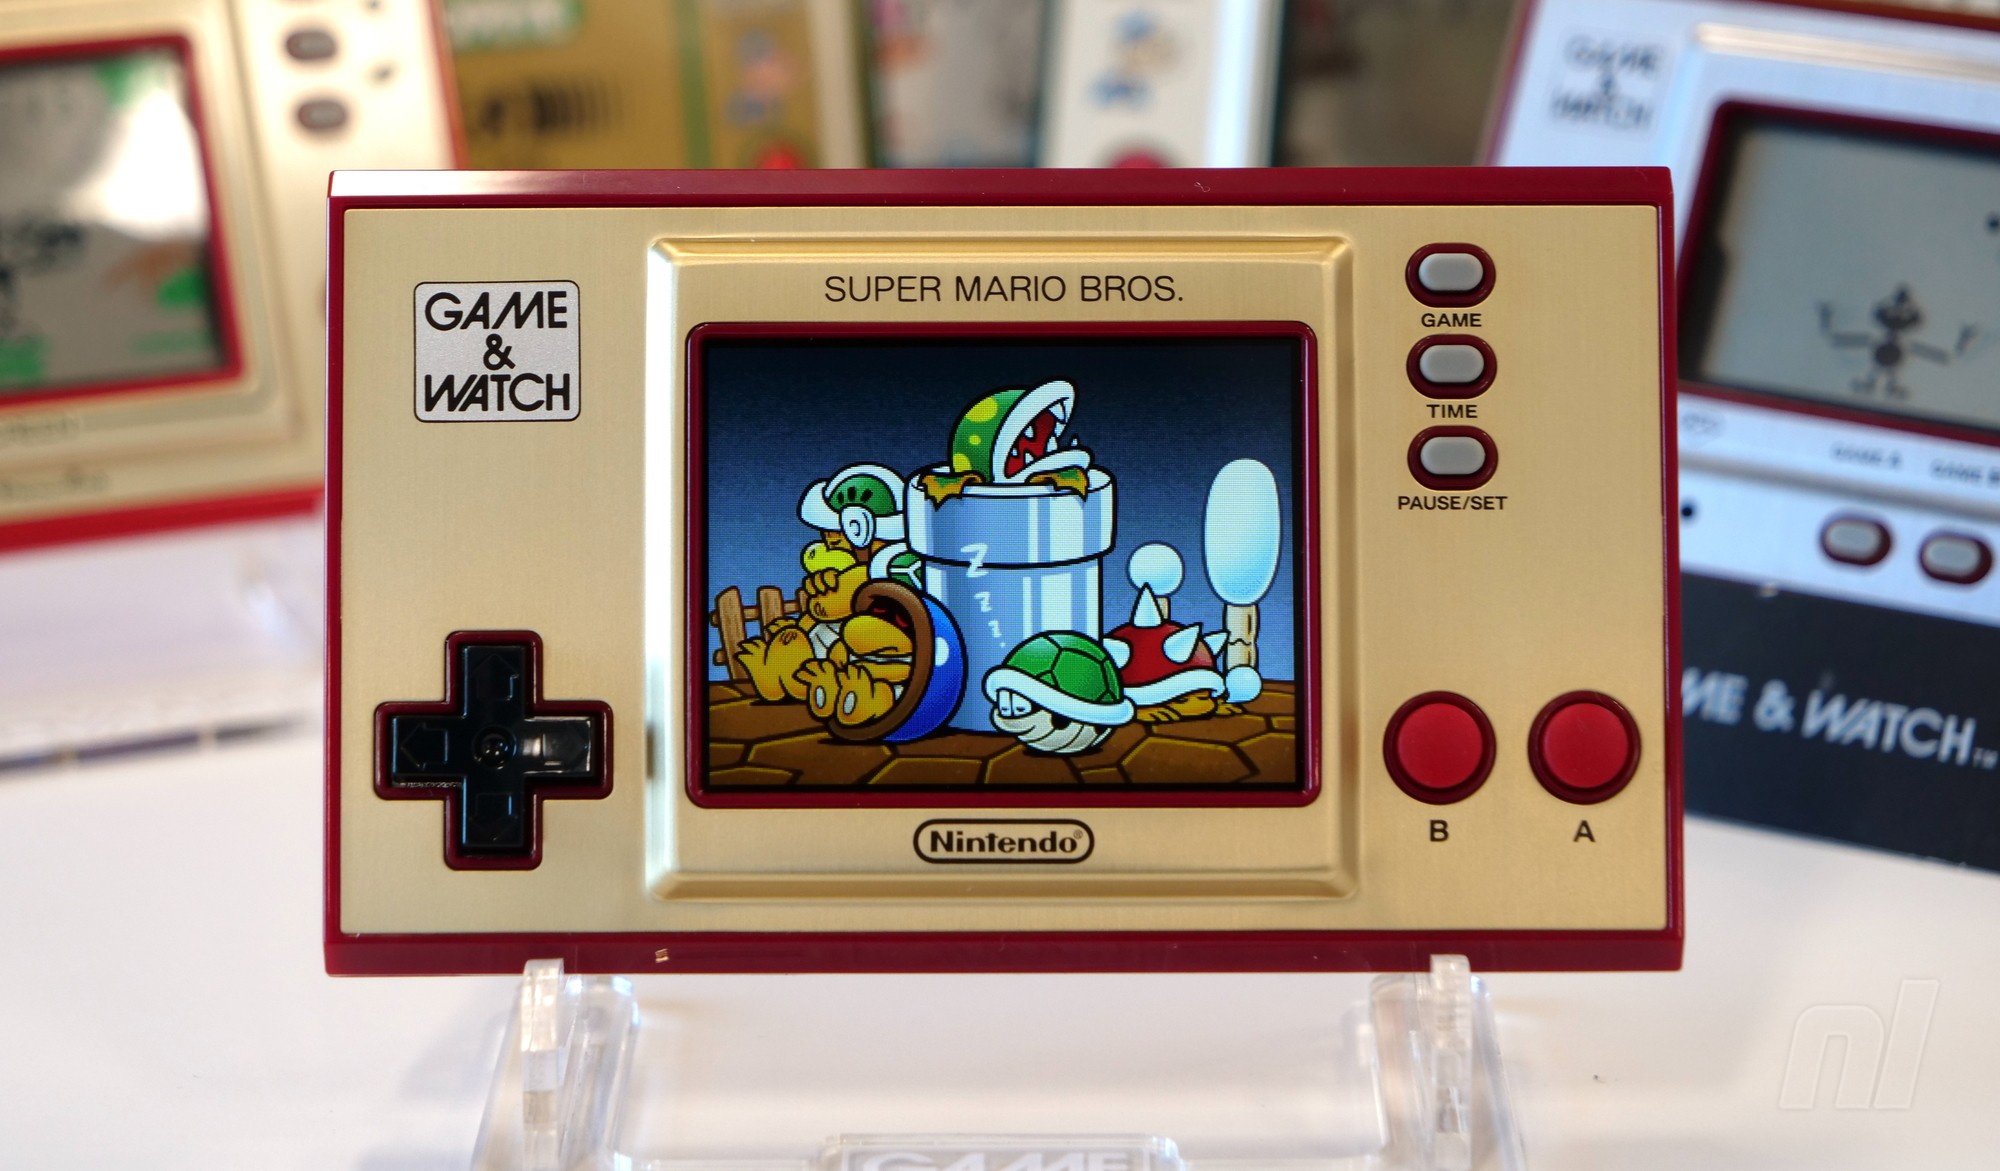 super mario bros game and watch online